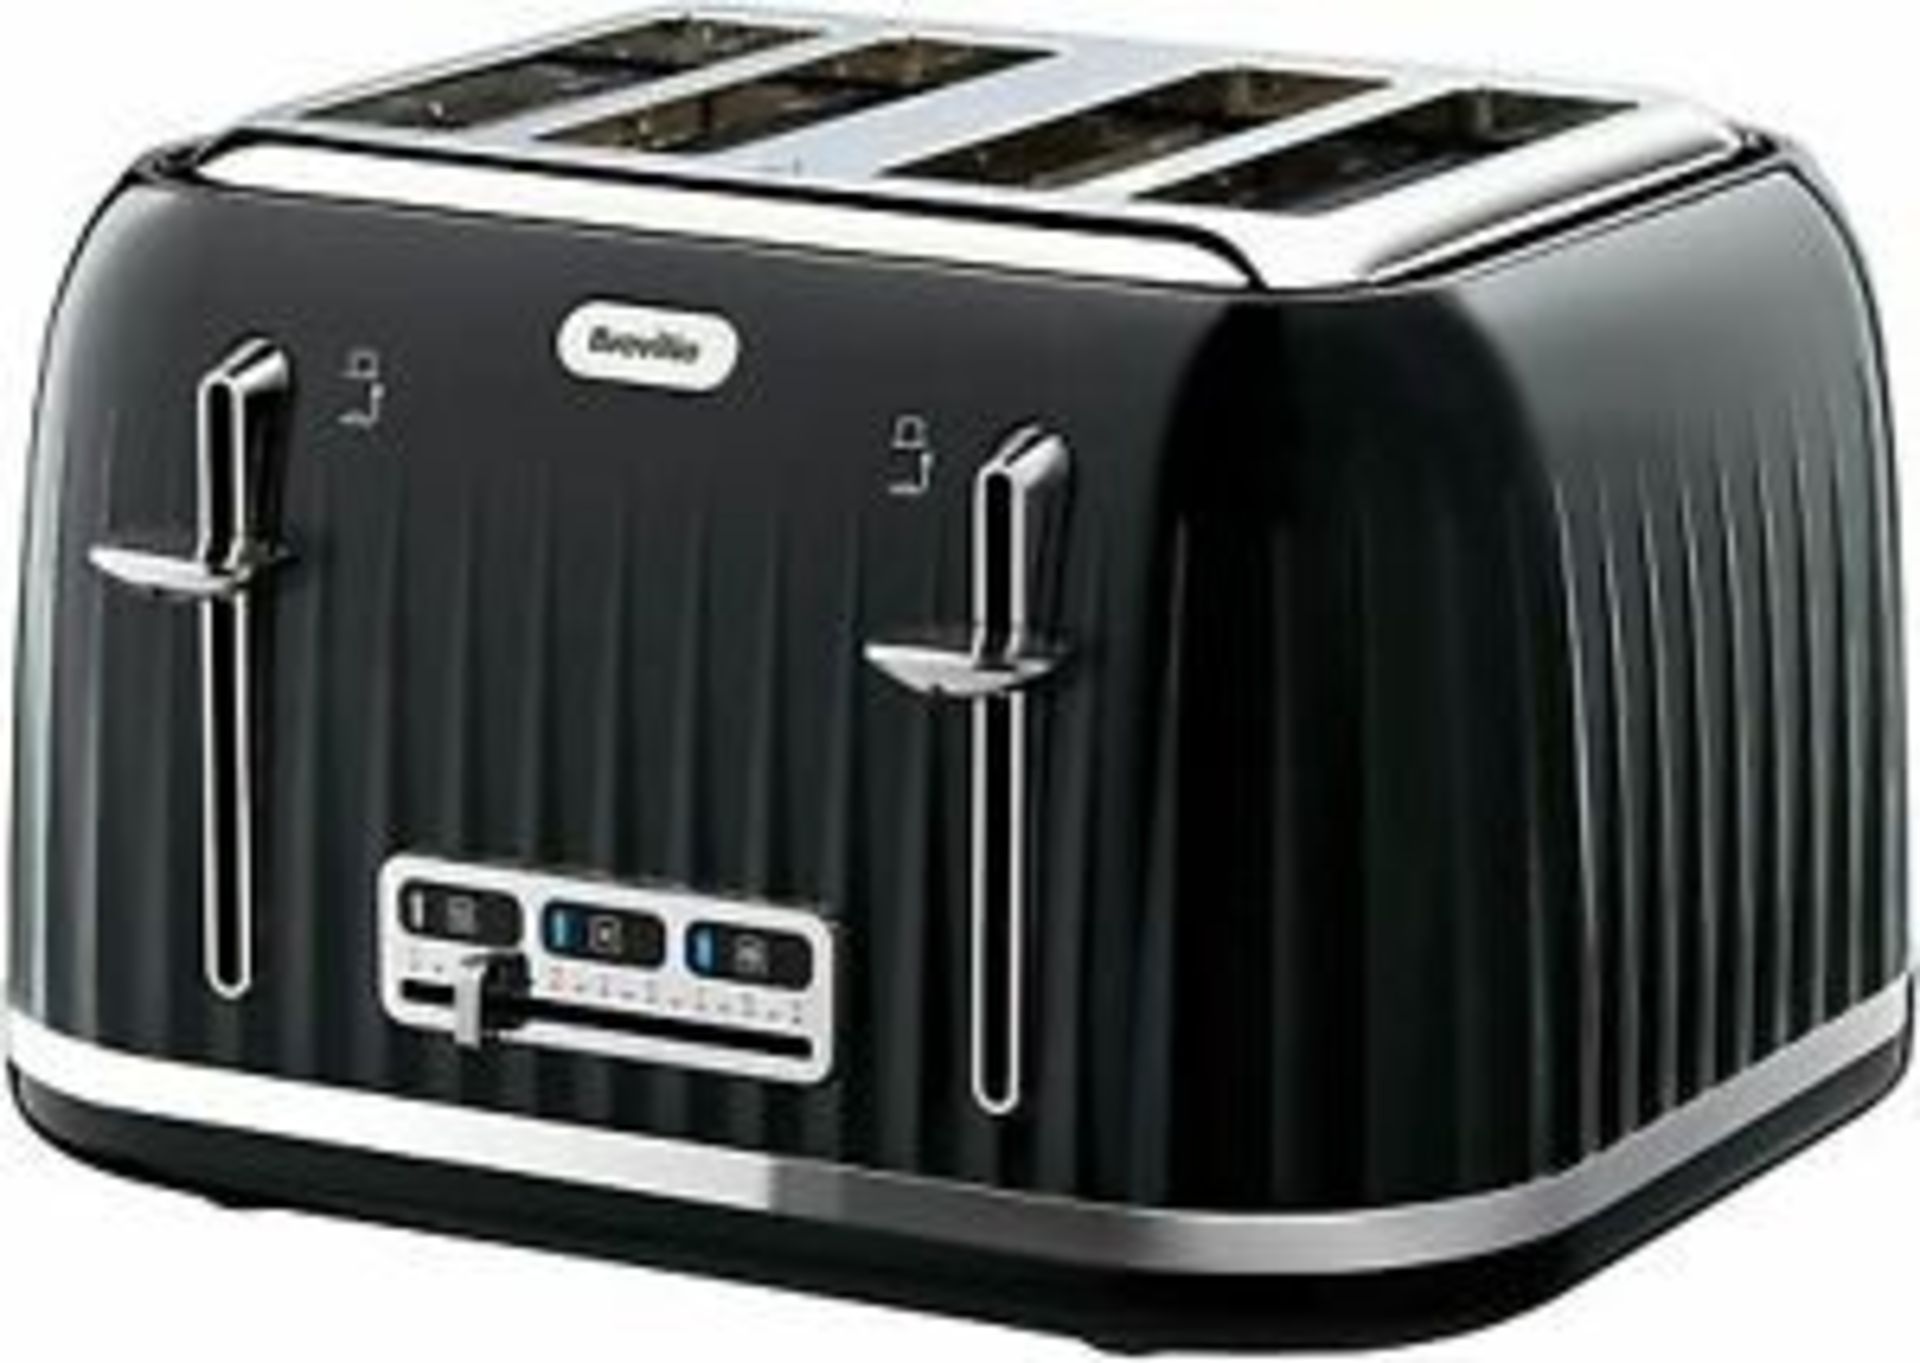 Breville VTT476 Impressions 4-Slice Toaster with High-Lift and Wide Slots, Black Â£34.99Condition